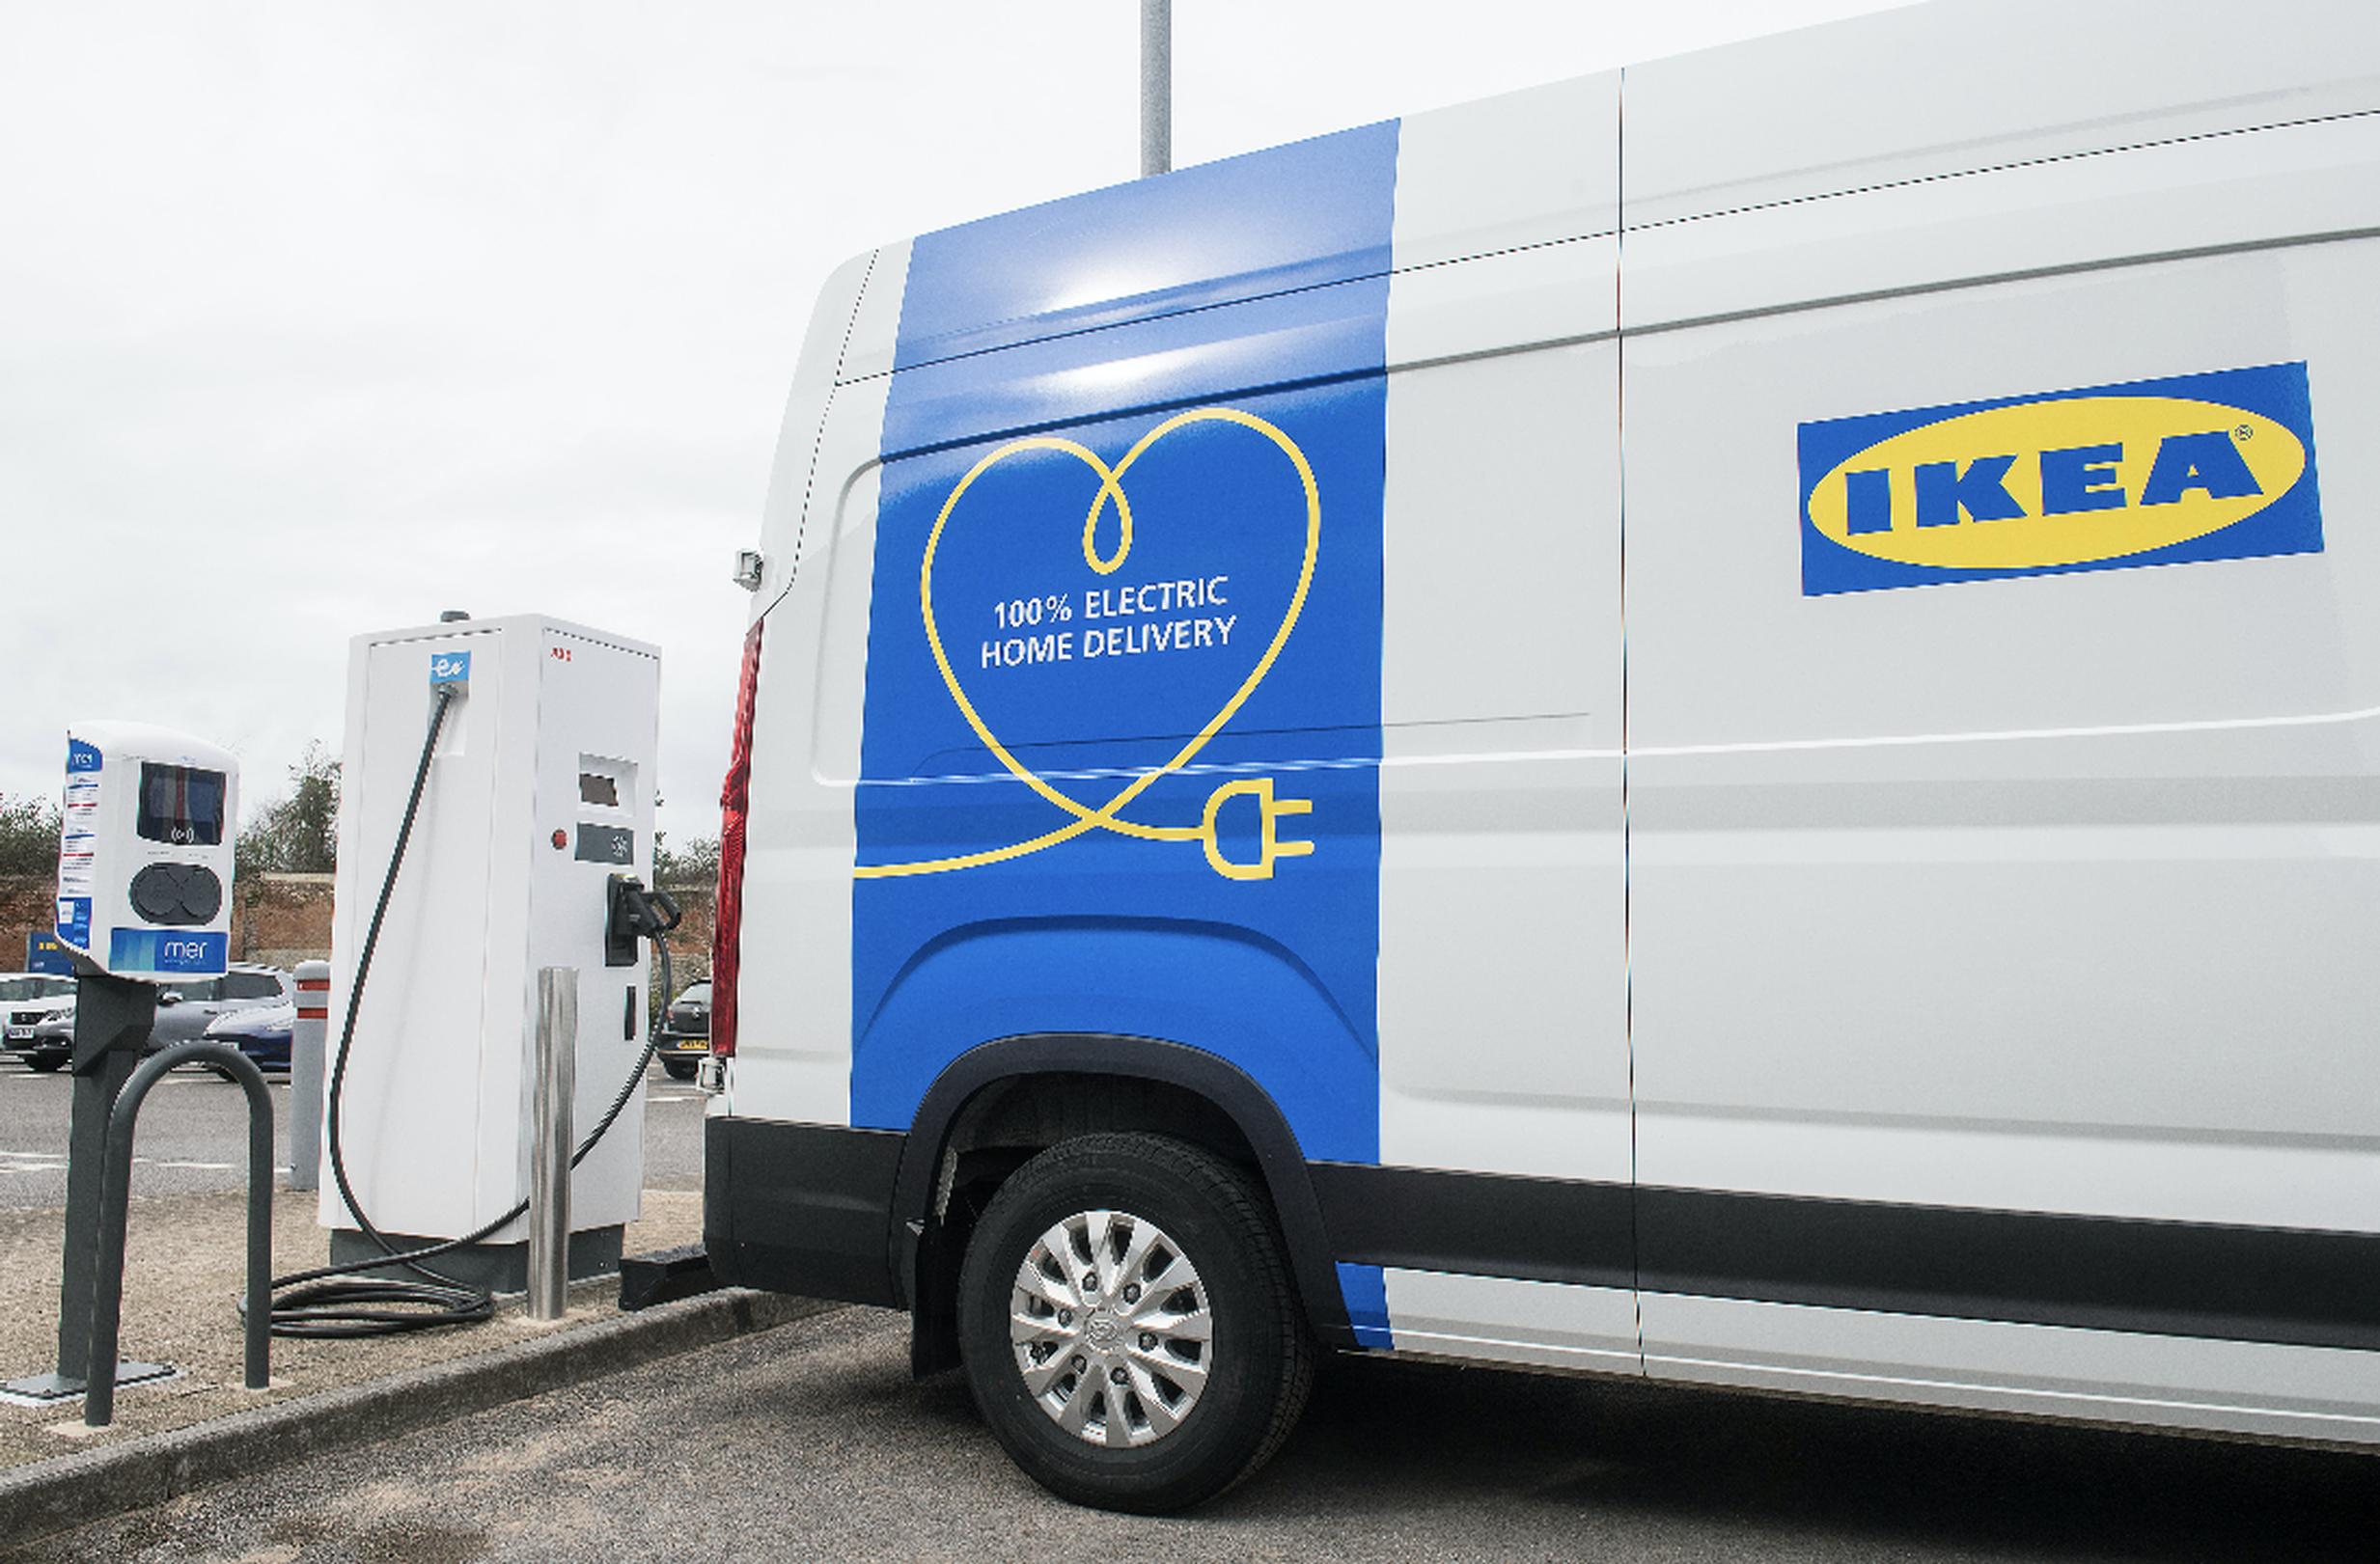 New chargers will be located at IKEA stores across the country